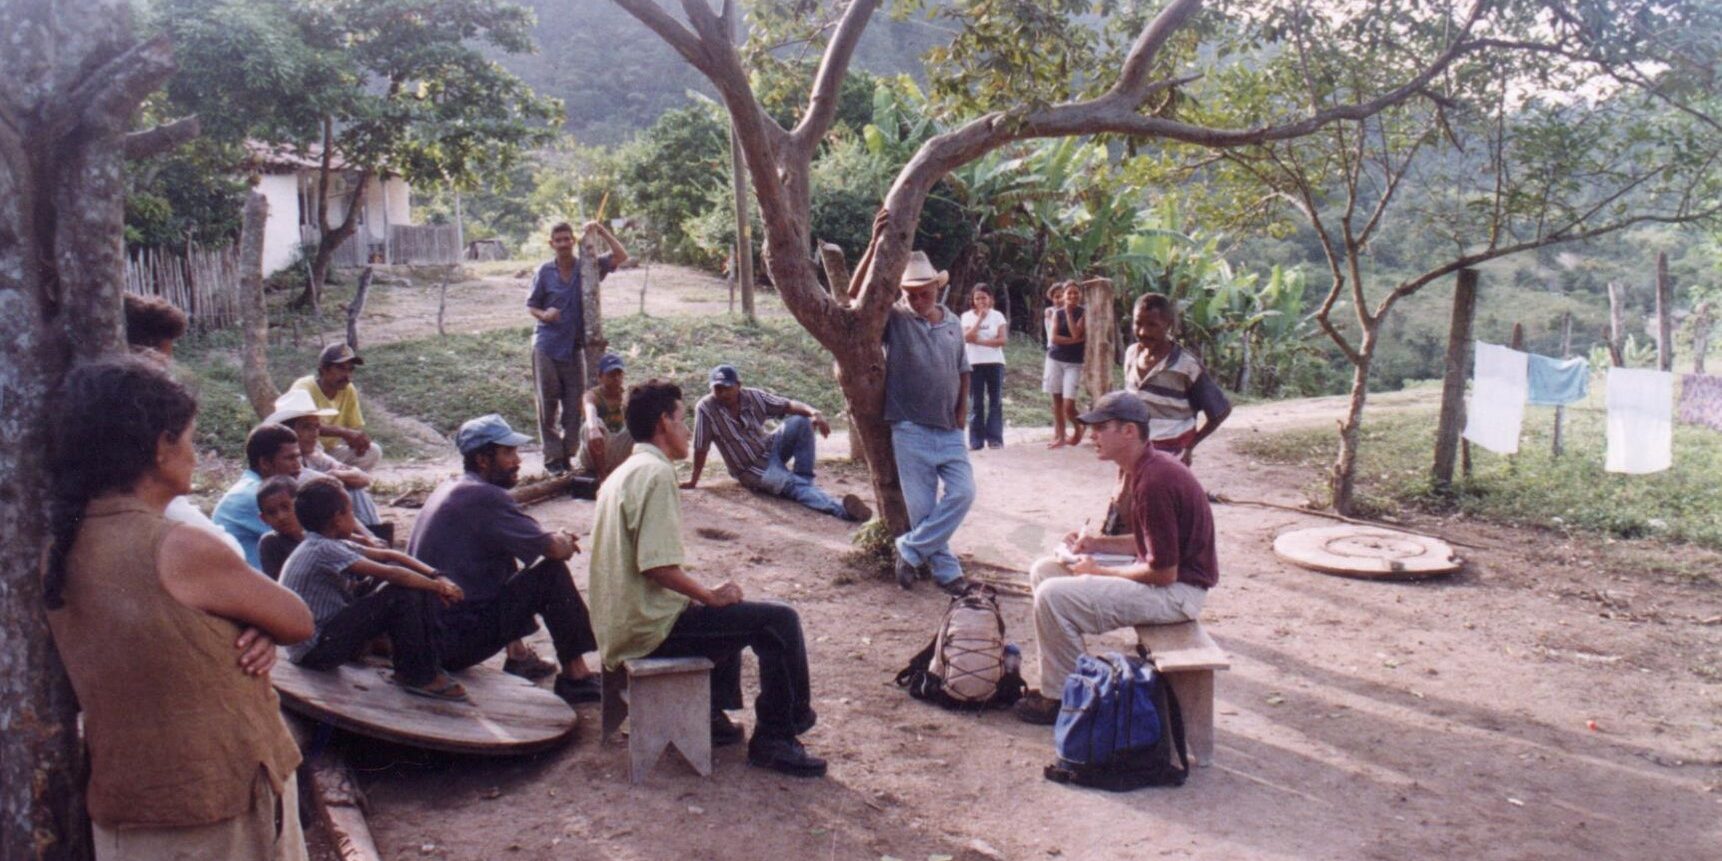 During his time in the Peace Corps, Mark worked with community members in Honduras on water issues.